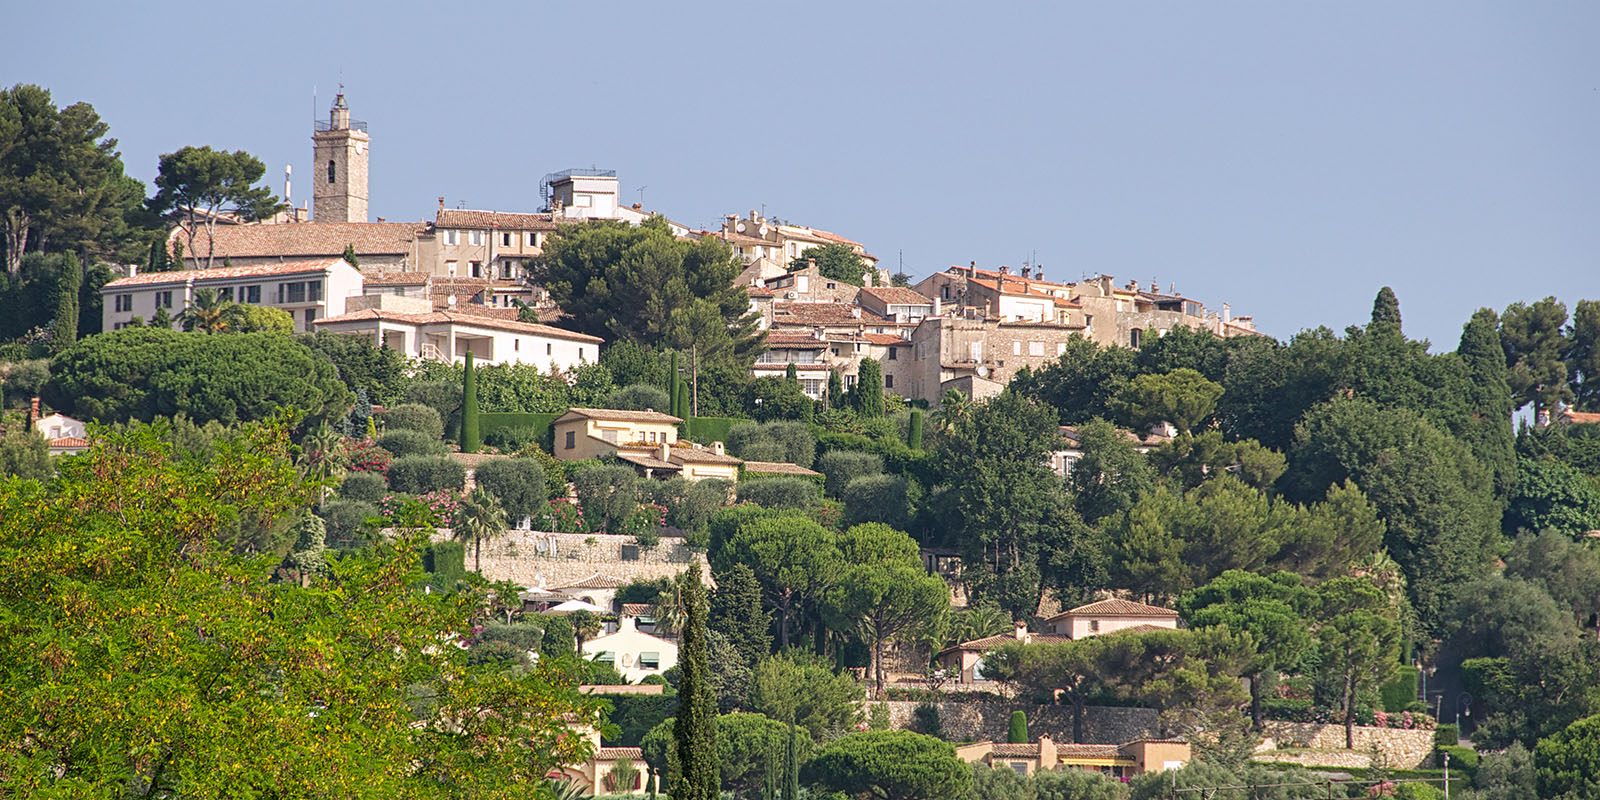 The old part of the village on top of the hill